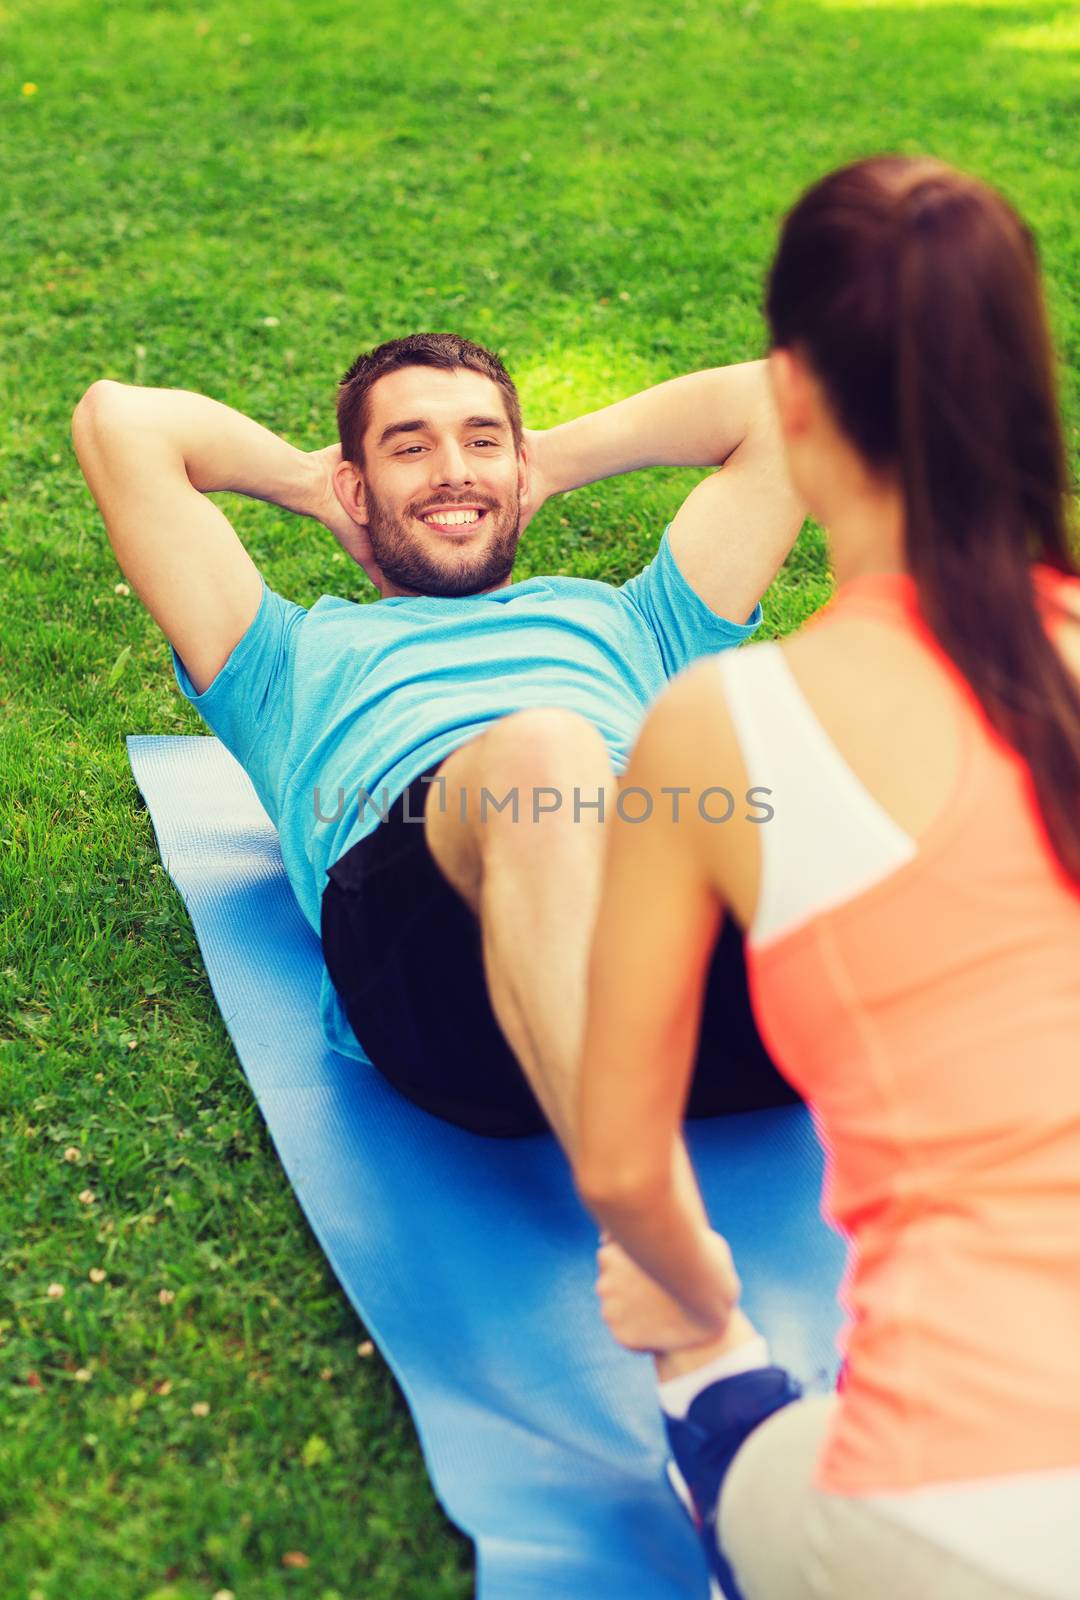 fitness, sport, training, teamwork and lifestyle concept - smiling man with personal trainer doing exercises on mat outdoors